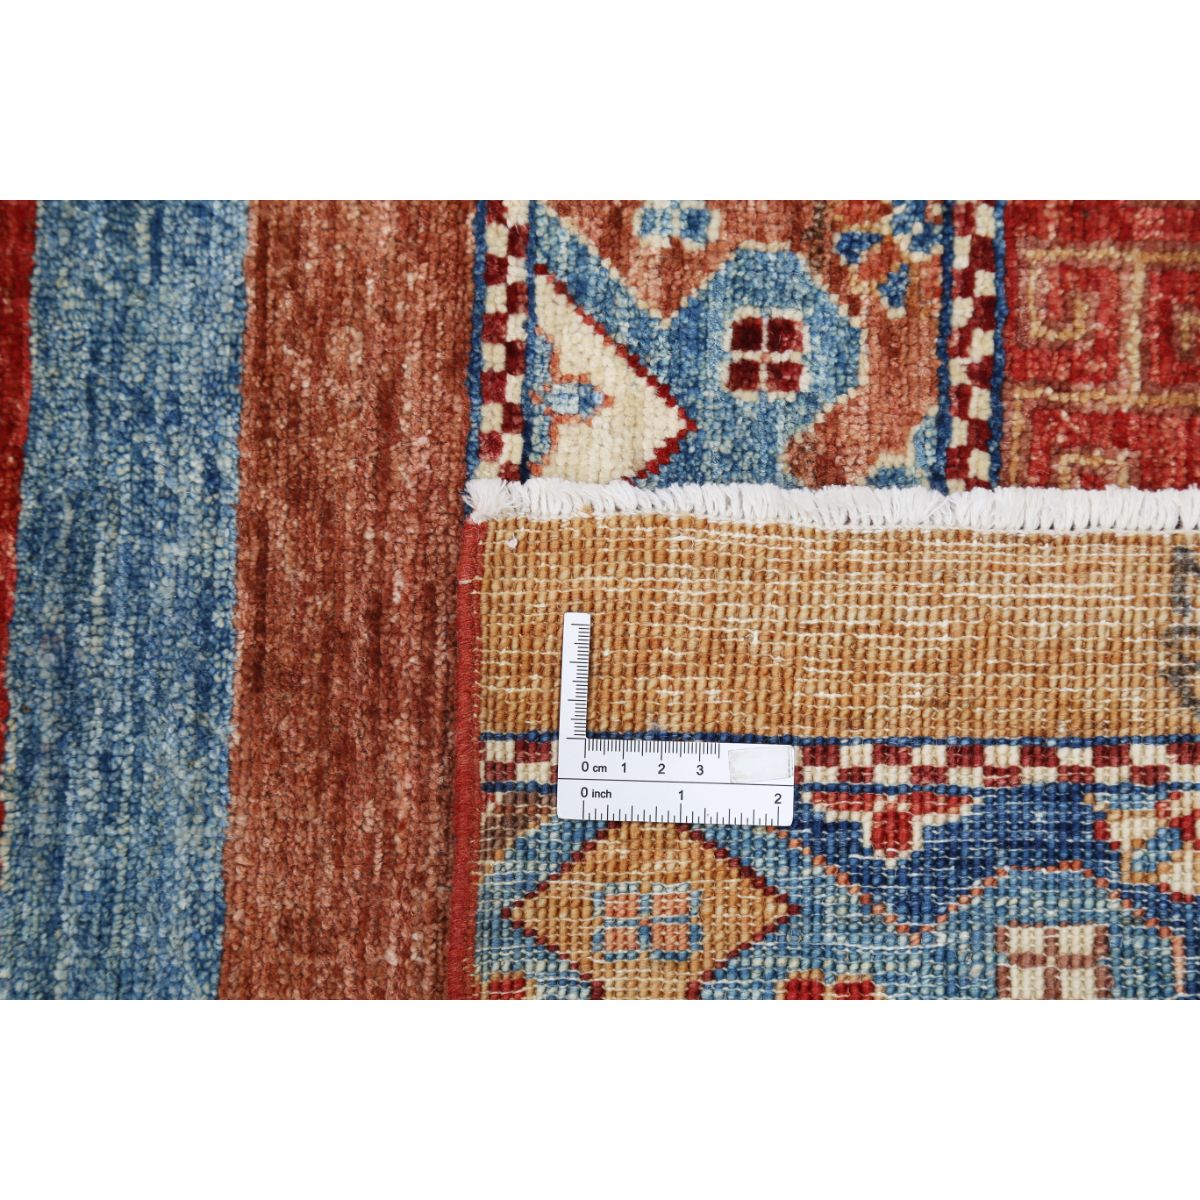 Khurjeen 5'10" X 7'8" Wool Hand-Knotted Rug